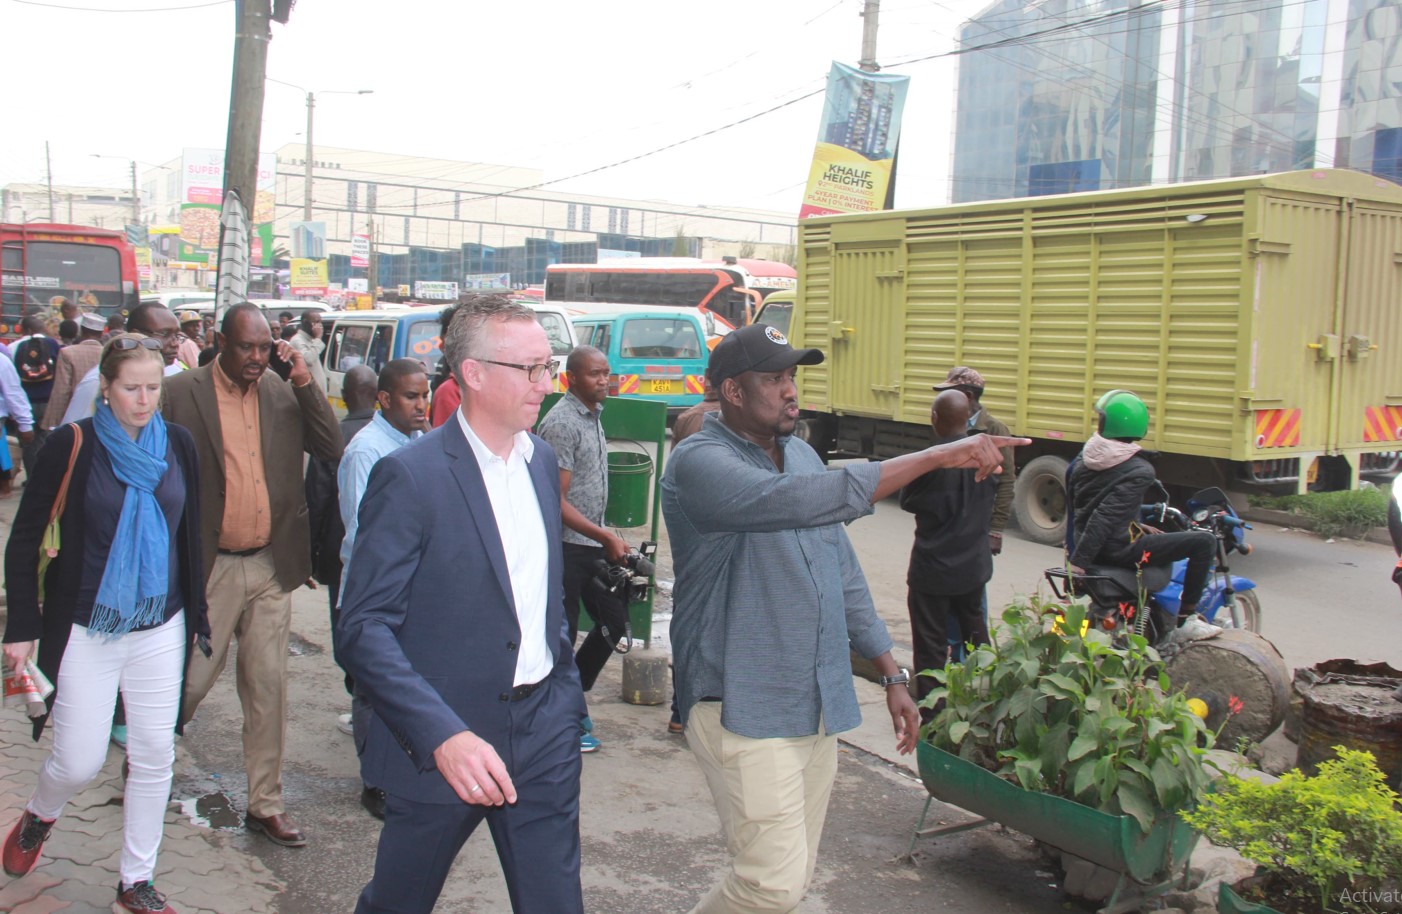 How Eastleigh's commitment to security turned it from 'no-go zone' to safe haven